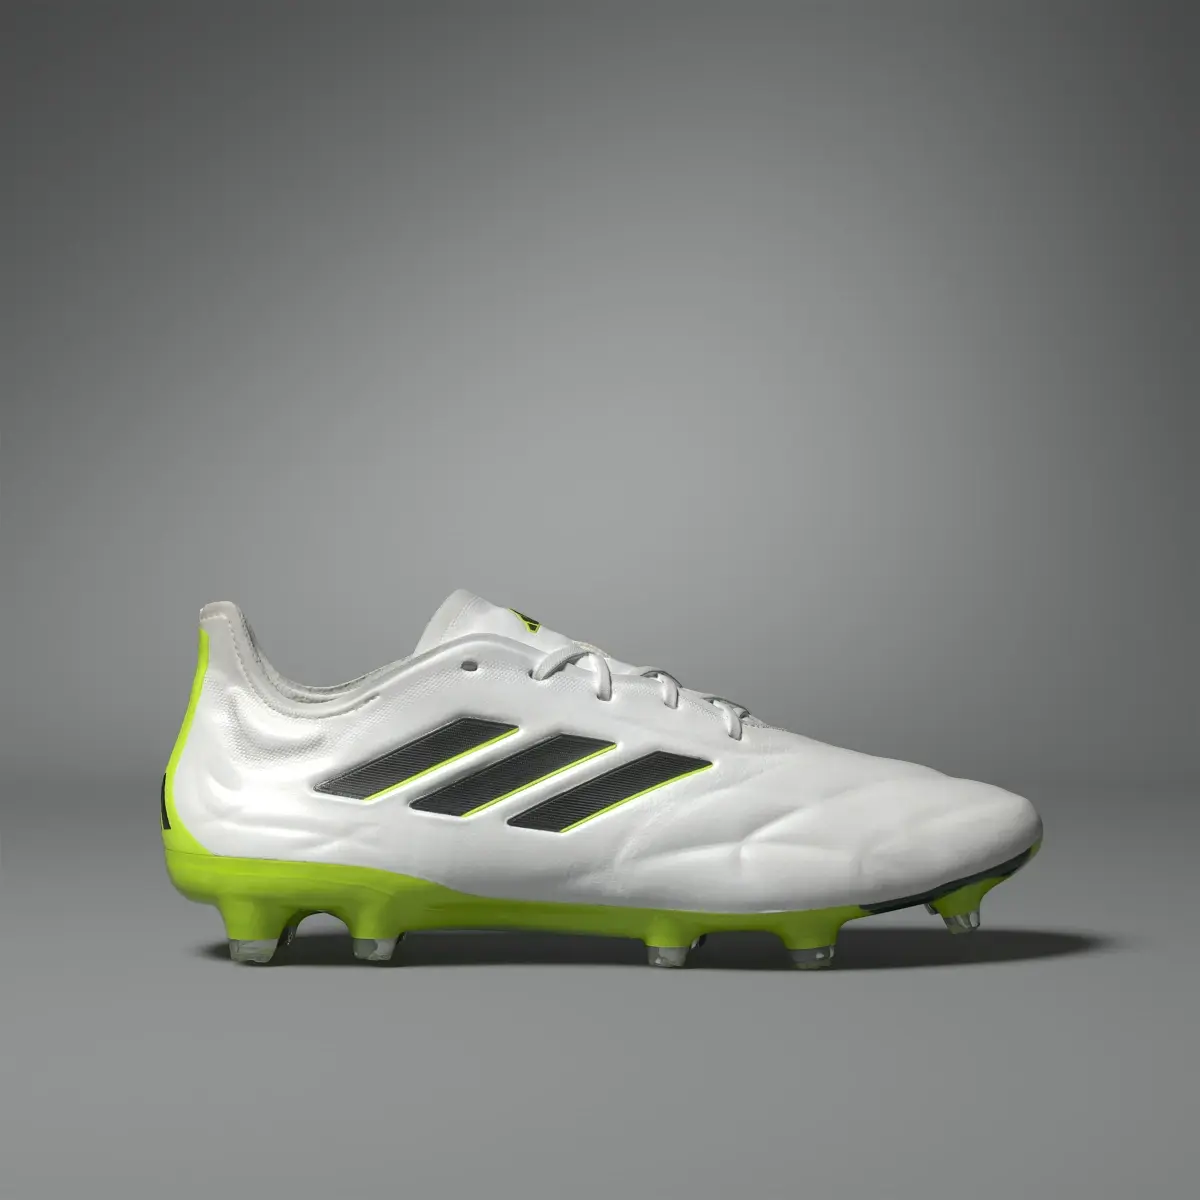 Adidas Copa Pure II.1 Firm Ground Boots. 3